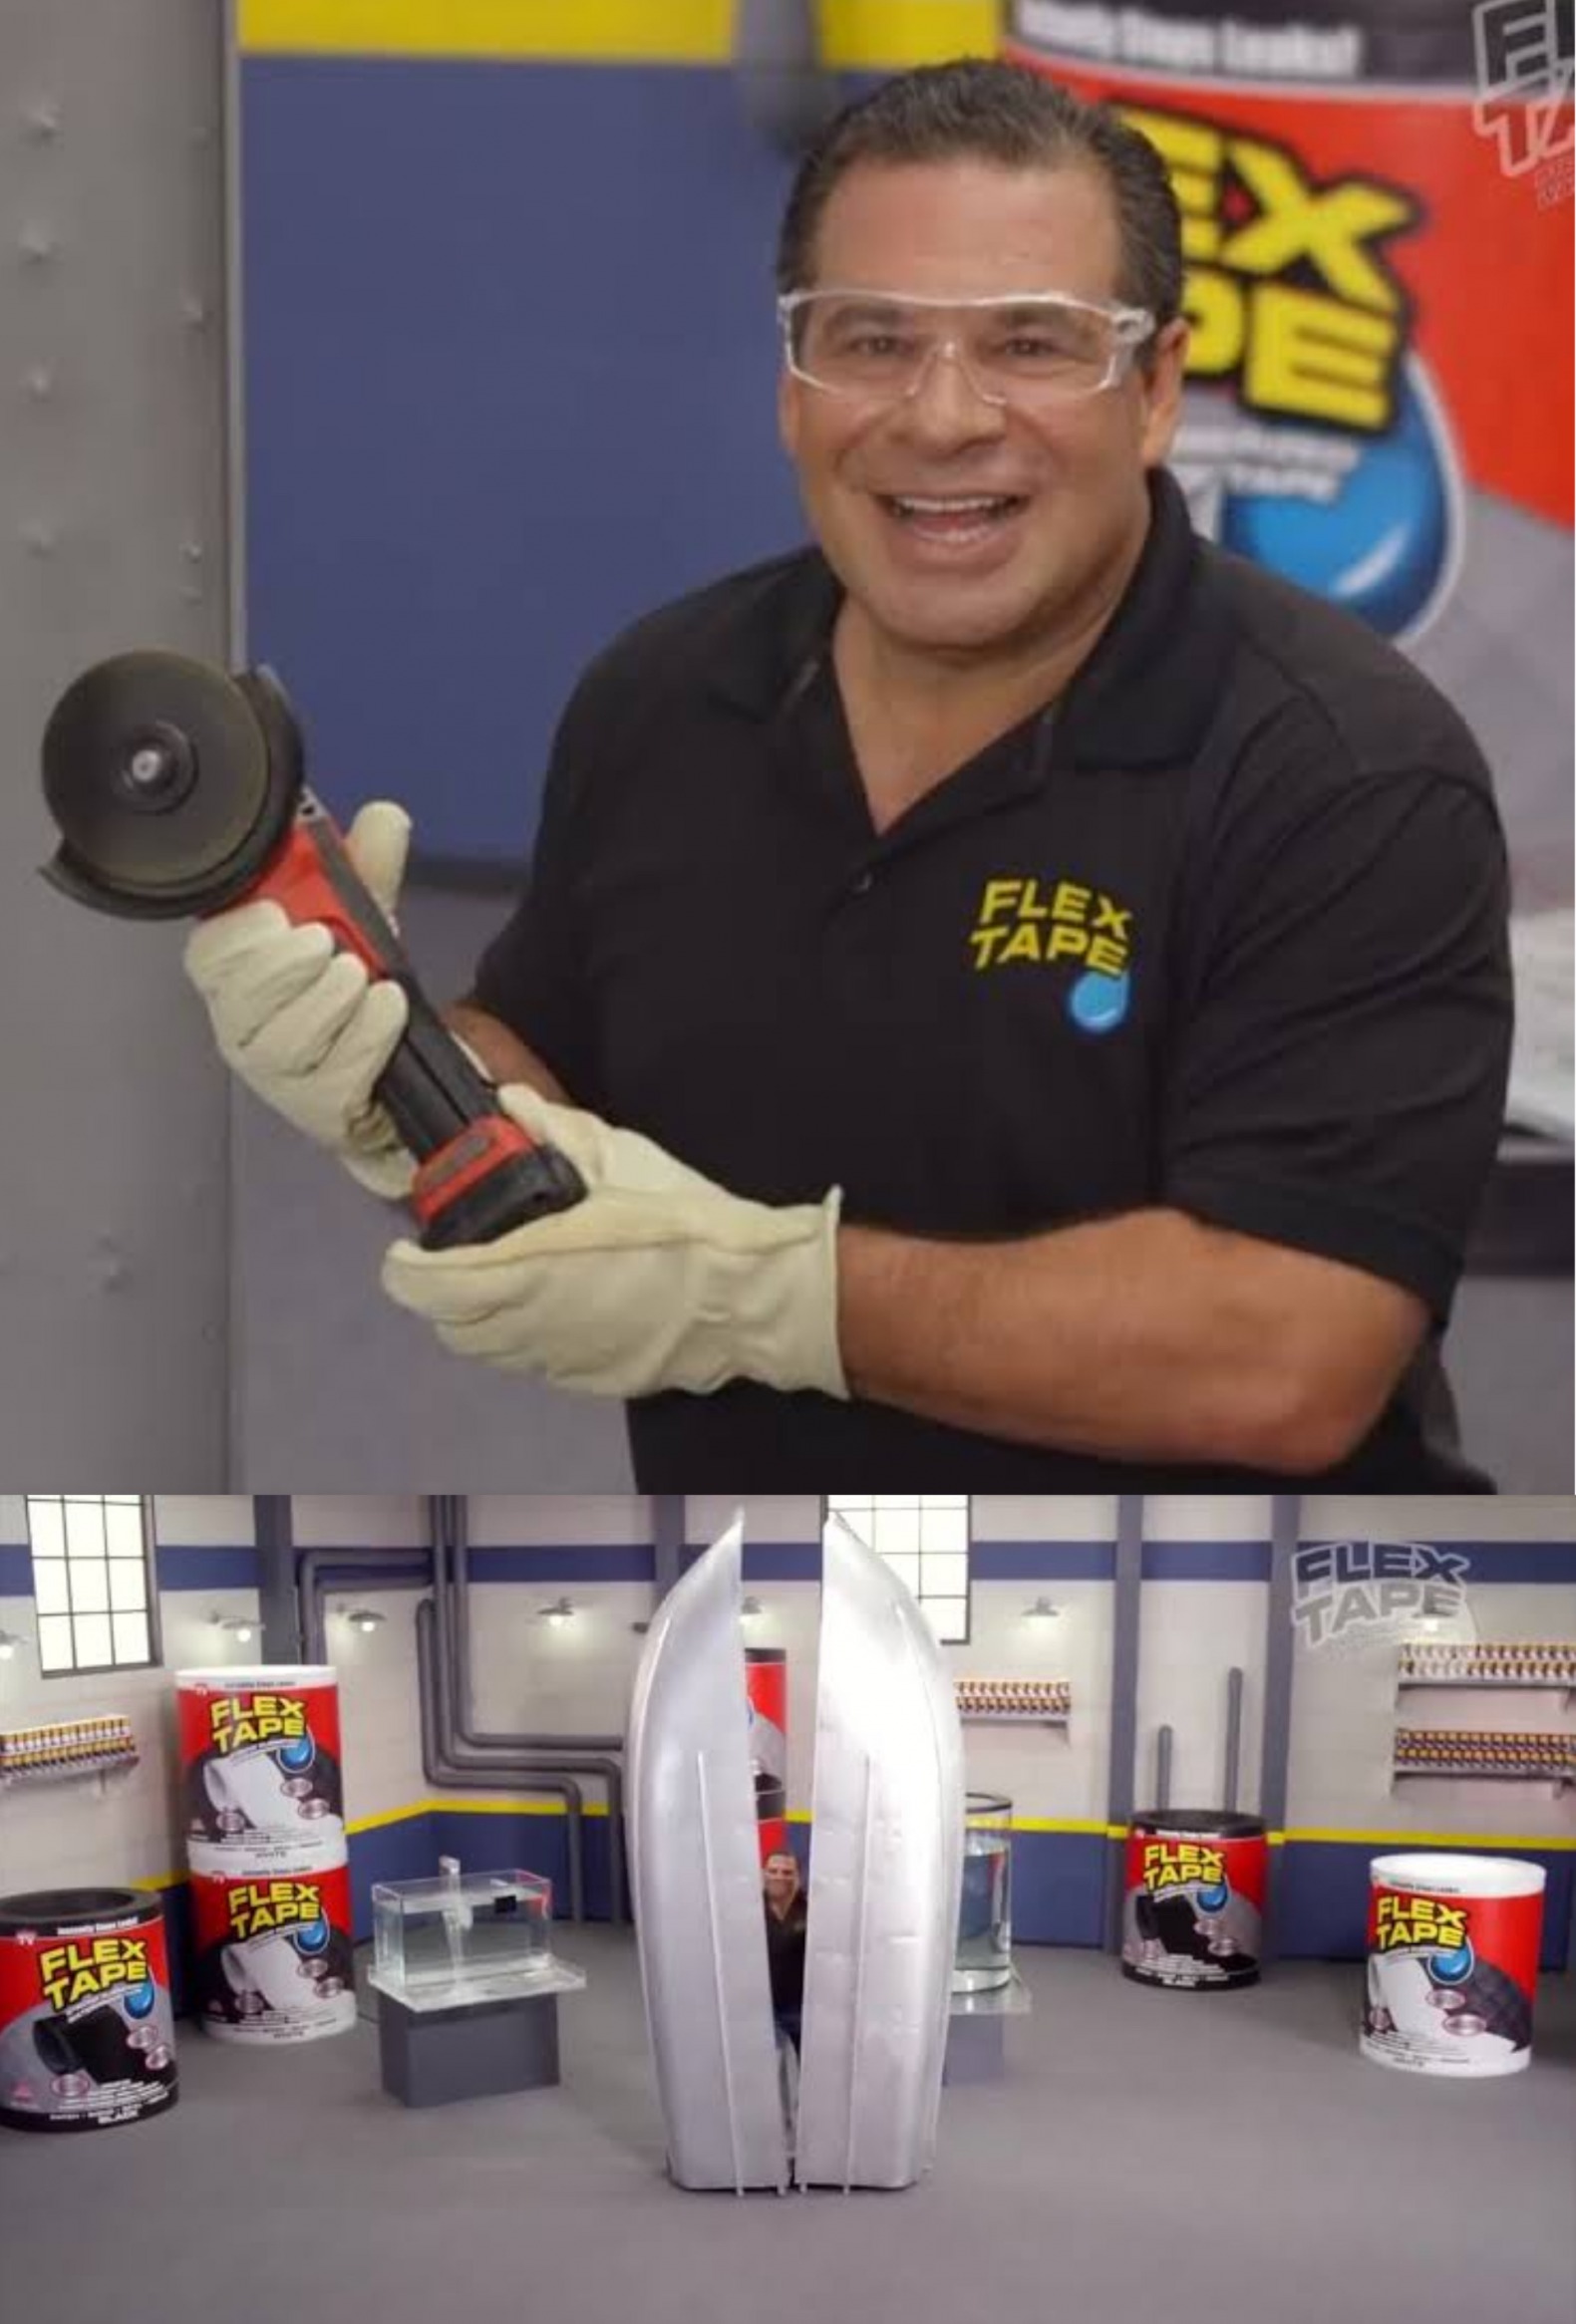 To show you the power of this flex tape, I sawed this boat Blank